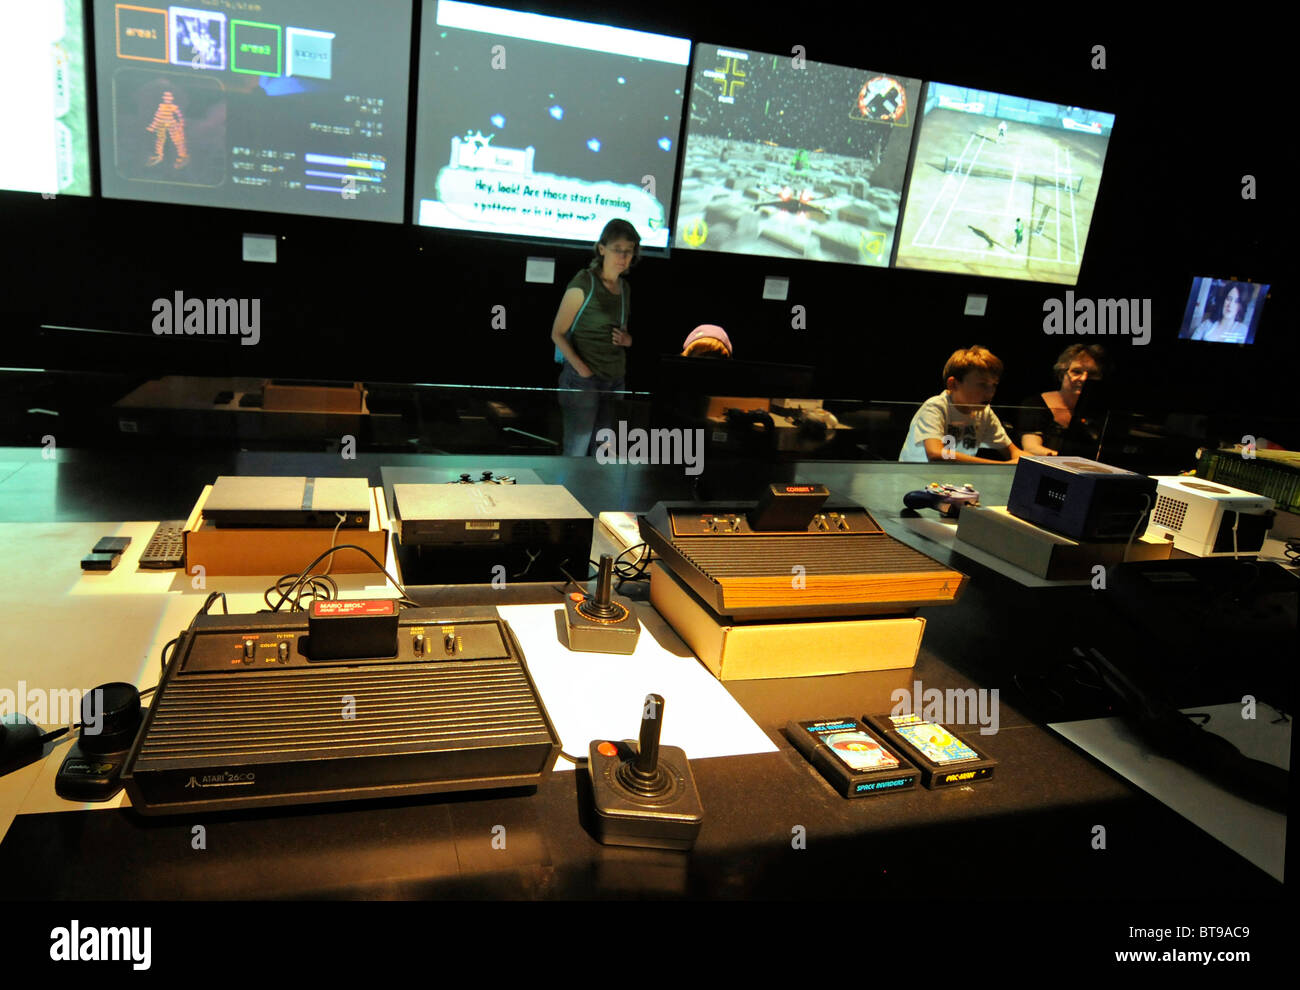 Photo taken during an exhibition about  the history of video games, featuring several consoles and games from the last 40 years. Stock Photo